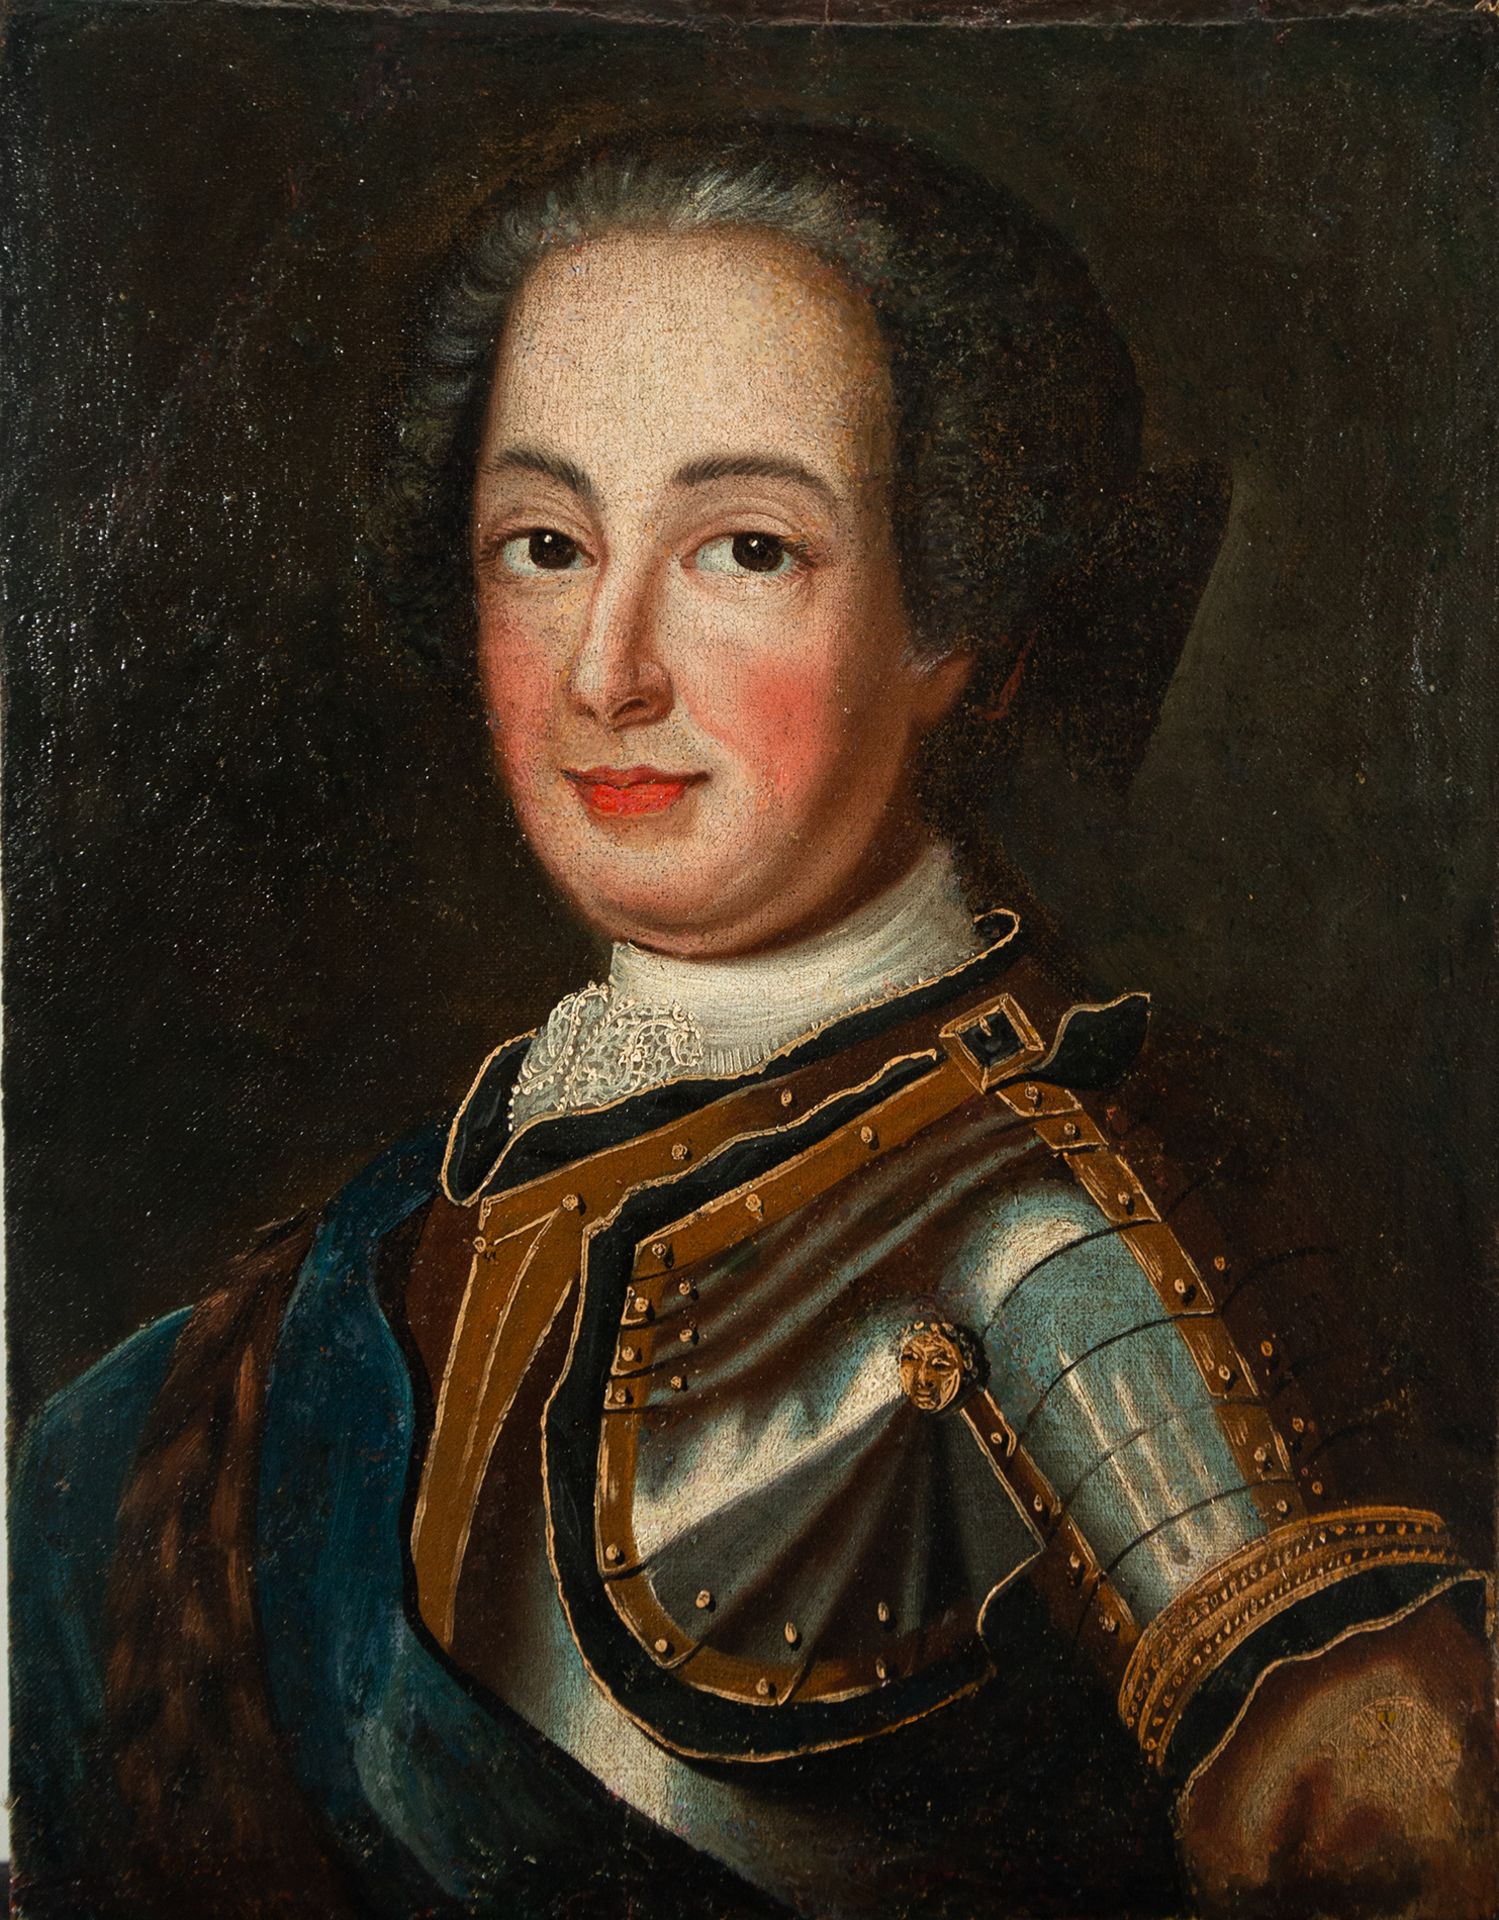 Portrait of Phillip V of Spain with Armor, Spanish school of the 17th century